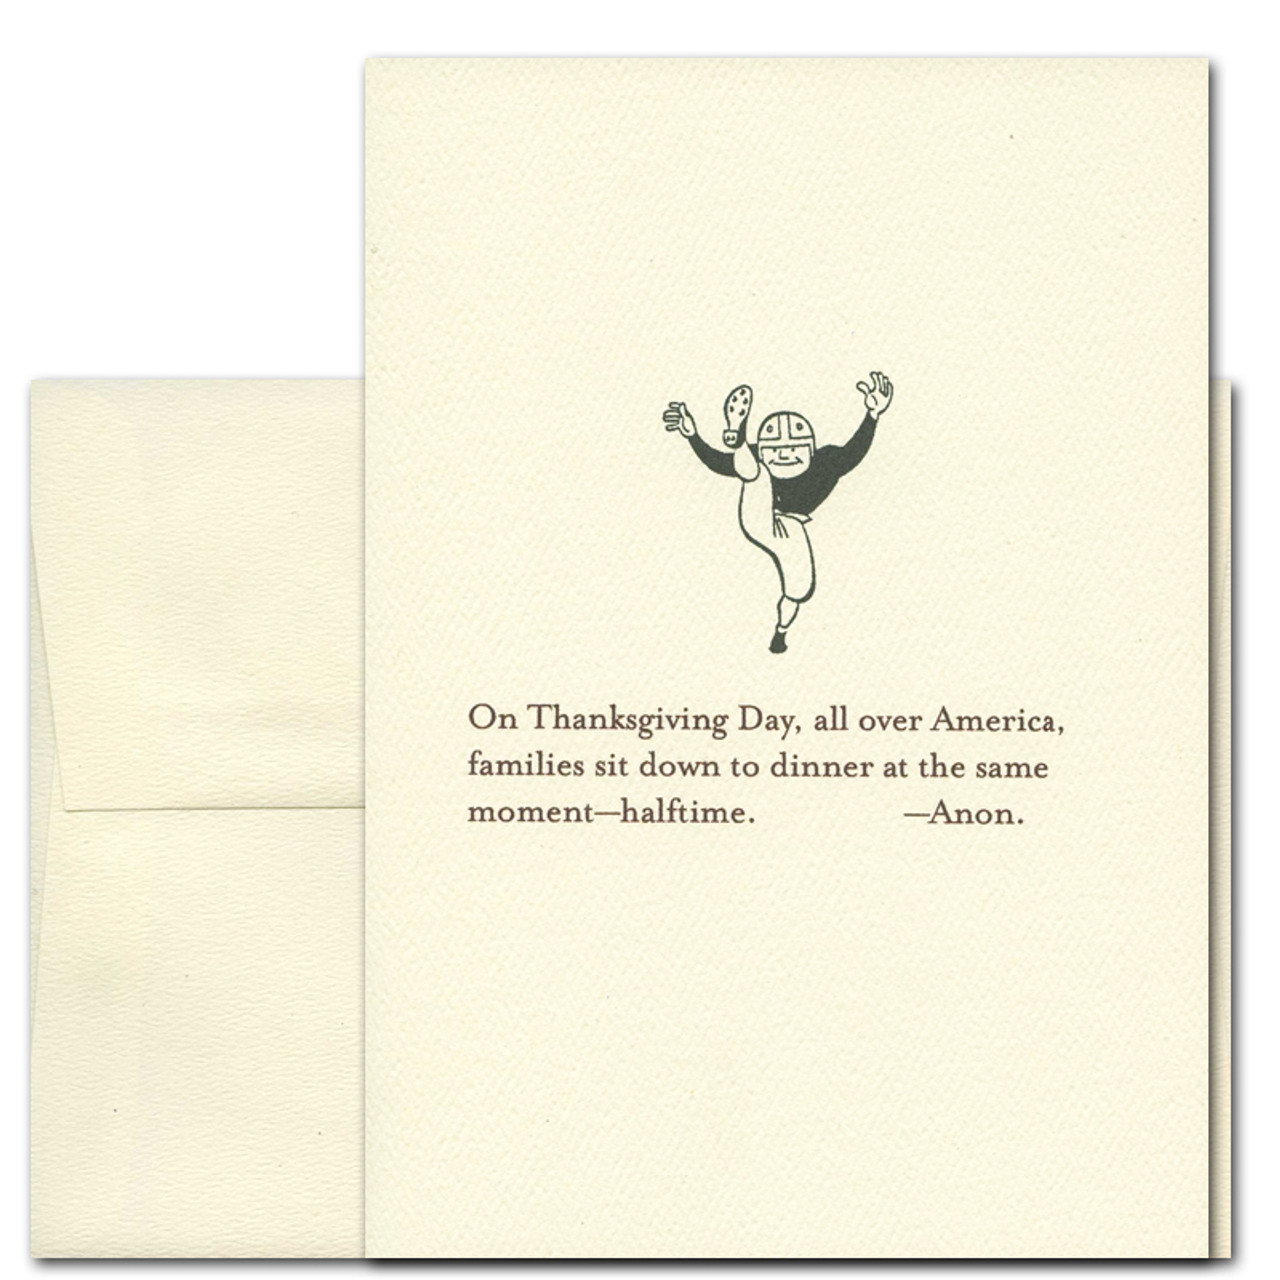 Thanksgiving Card - Dinner at Halftime. Cover shows illustration of old-time football player and the words, "On Thanksgiving Day, all over America, families sit down to dinner at the same moment - halftime. -Anon"